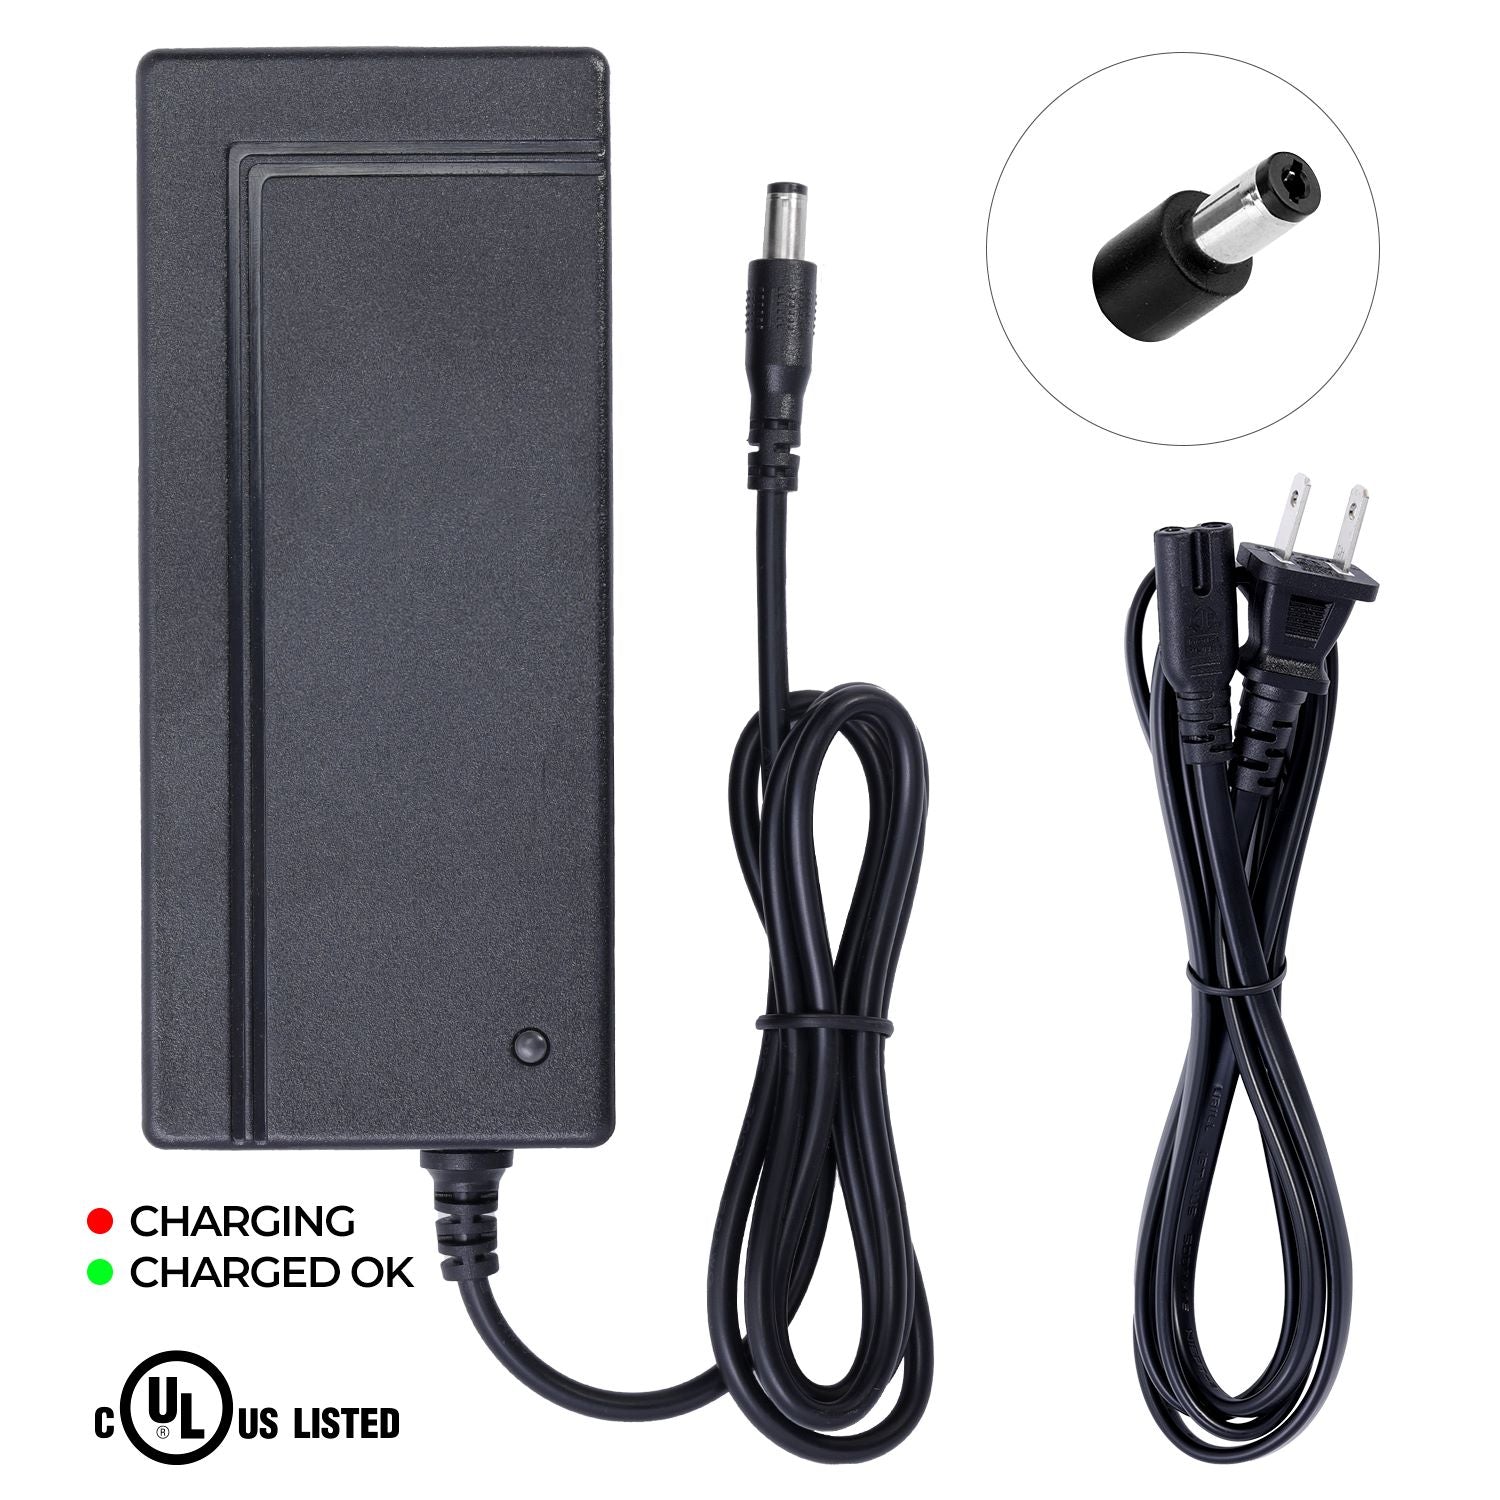 UL Certified Compatible Charger for Hiboy S2 Electric Scooter